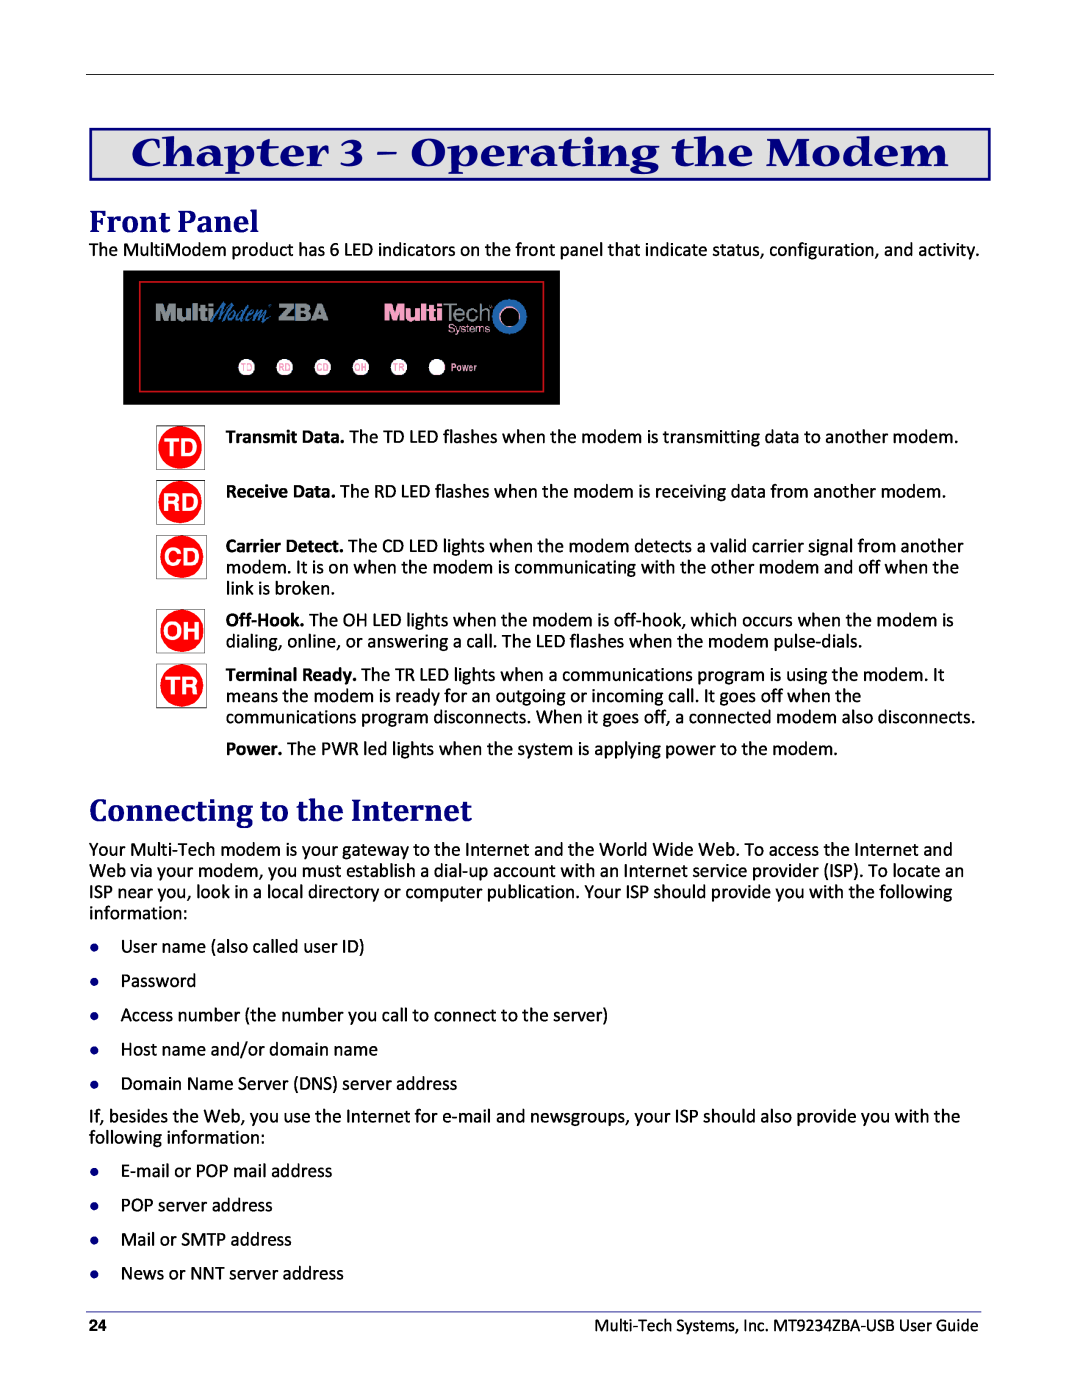 Multitech MT9234ZBA-USB manual Operating the Modem, Front Panel, Connecting to the Internet 